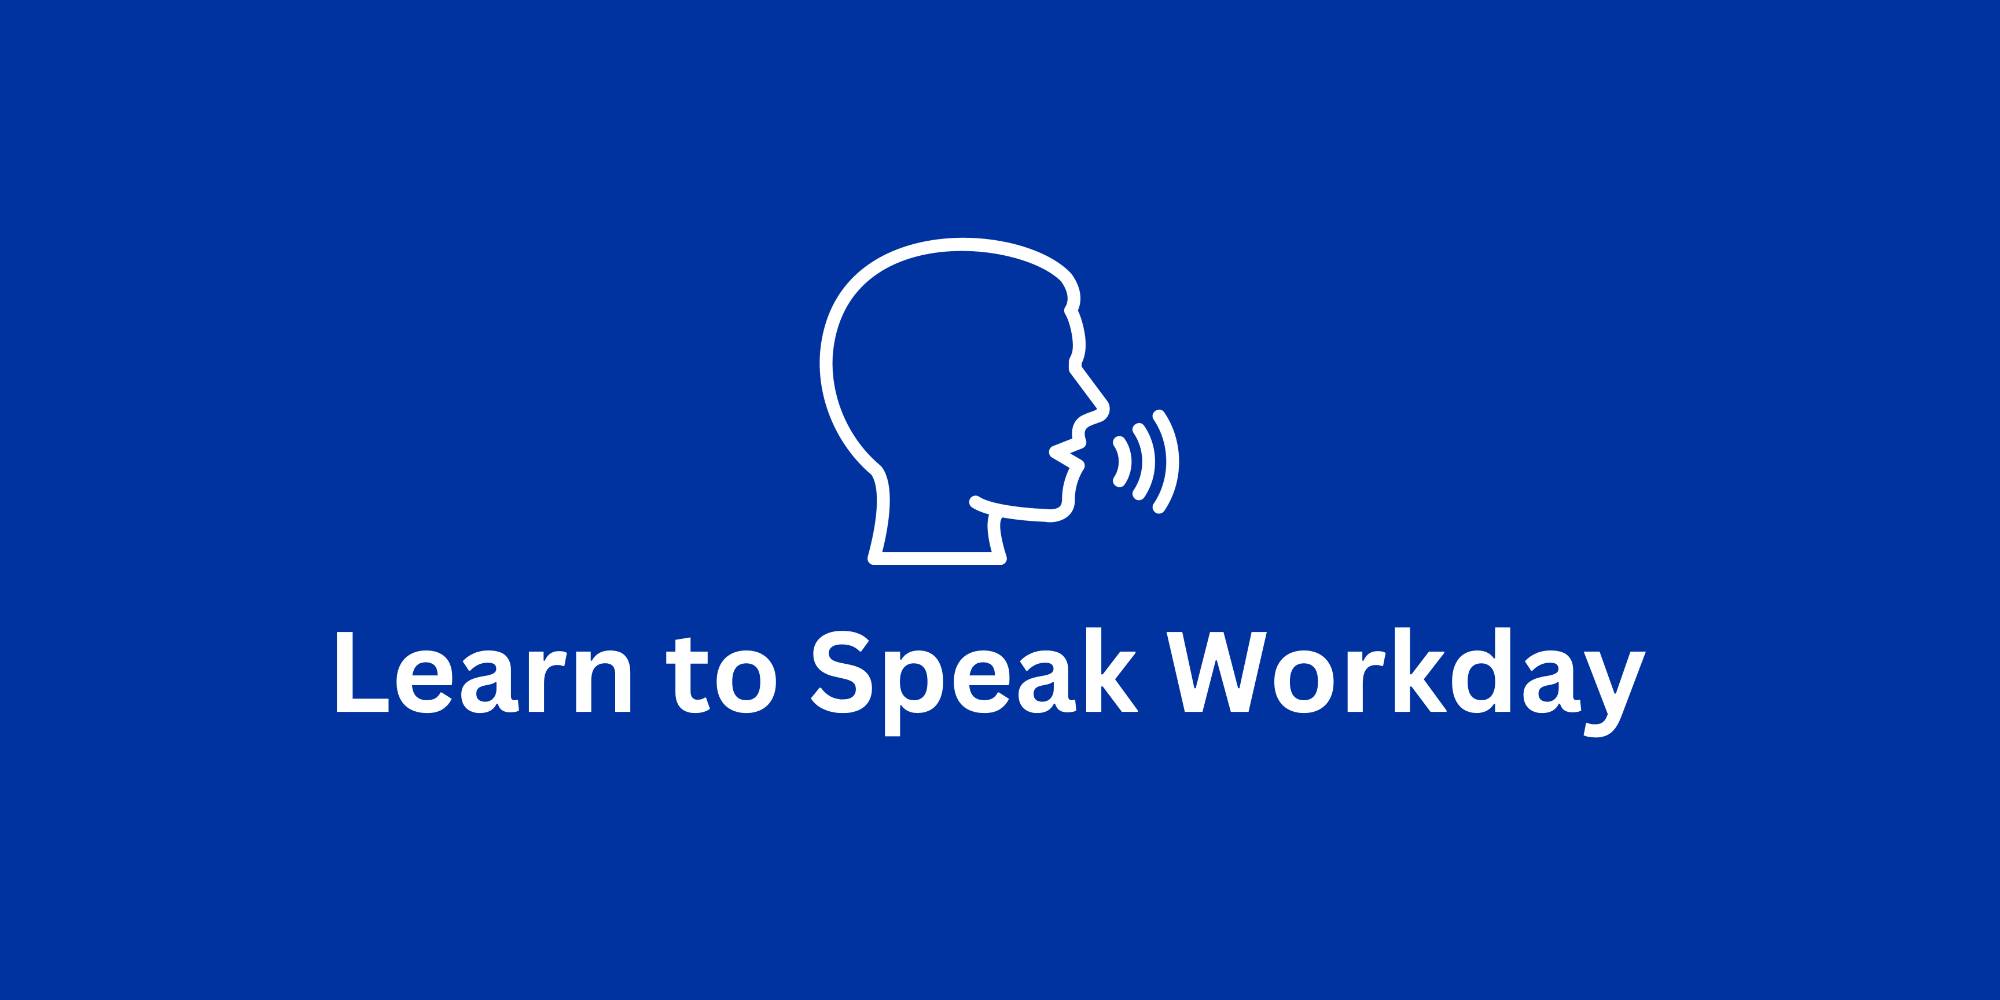 Learn to Speak Workday